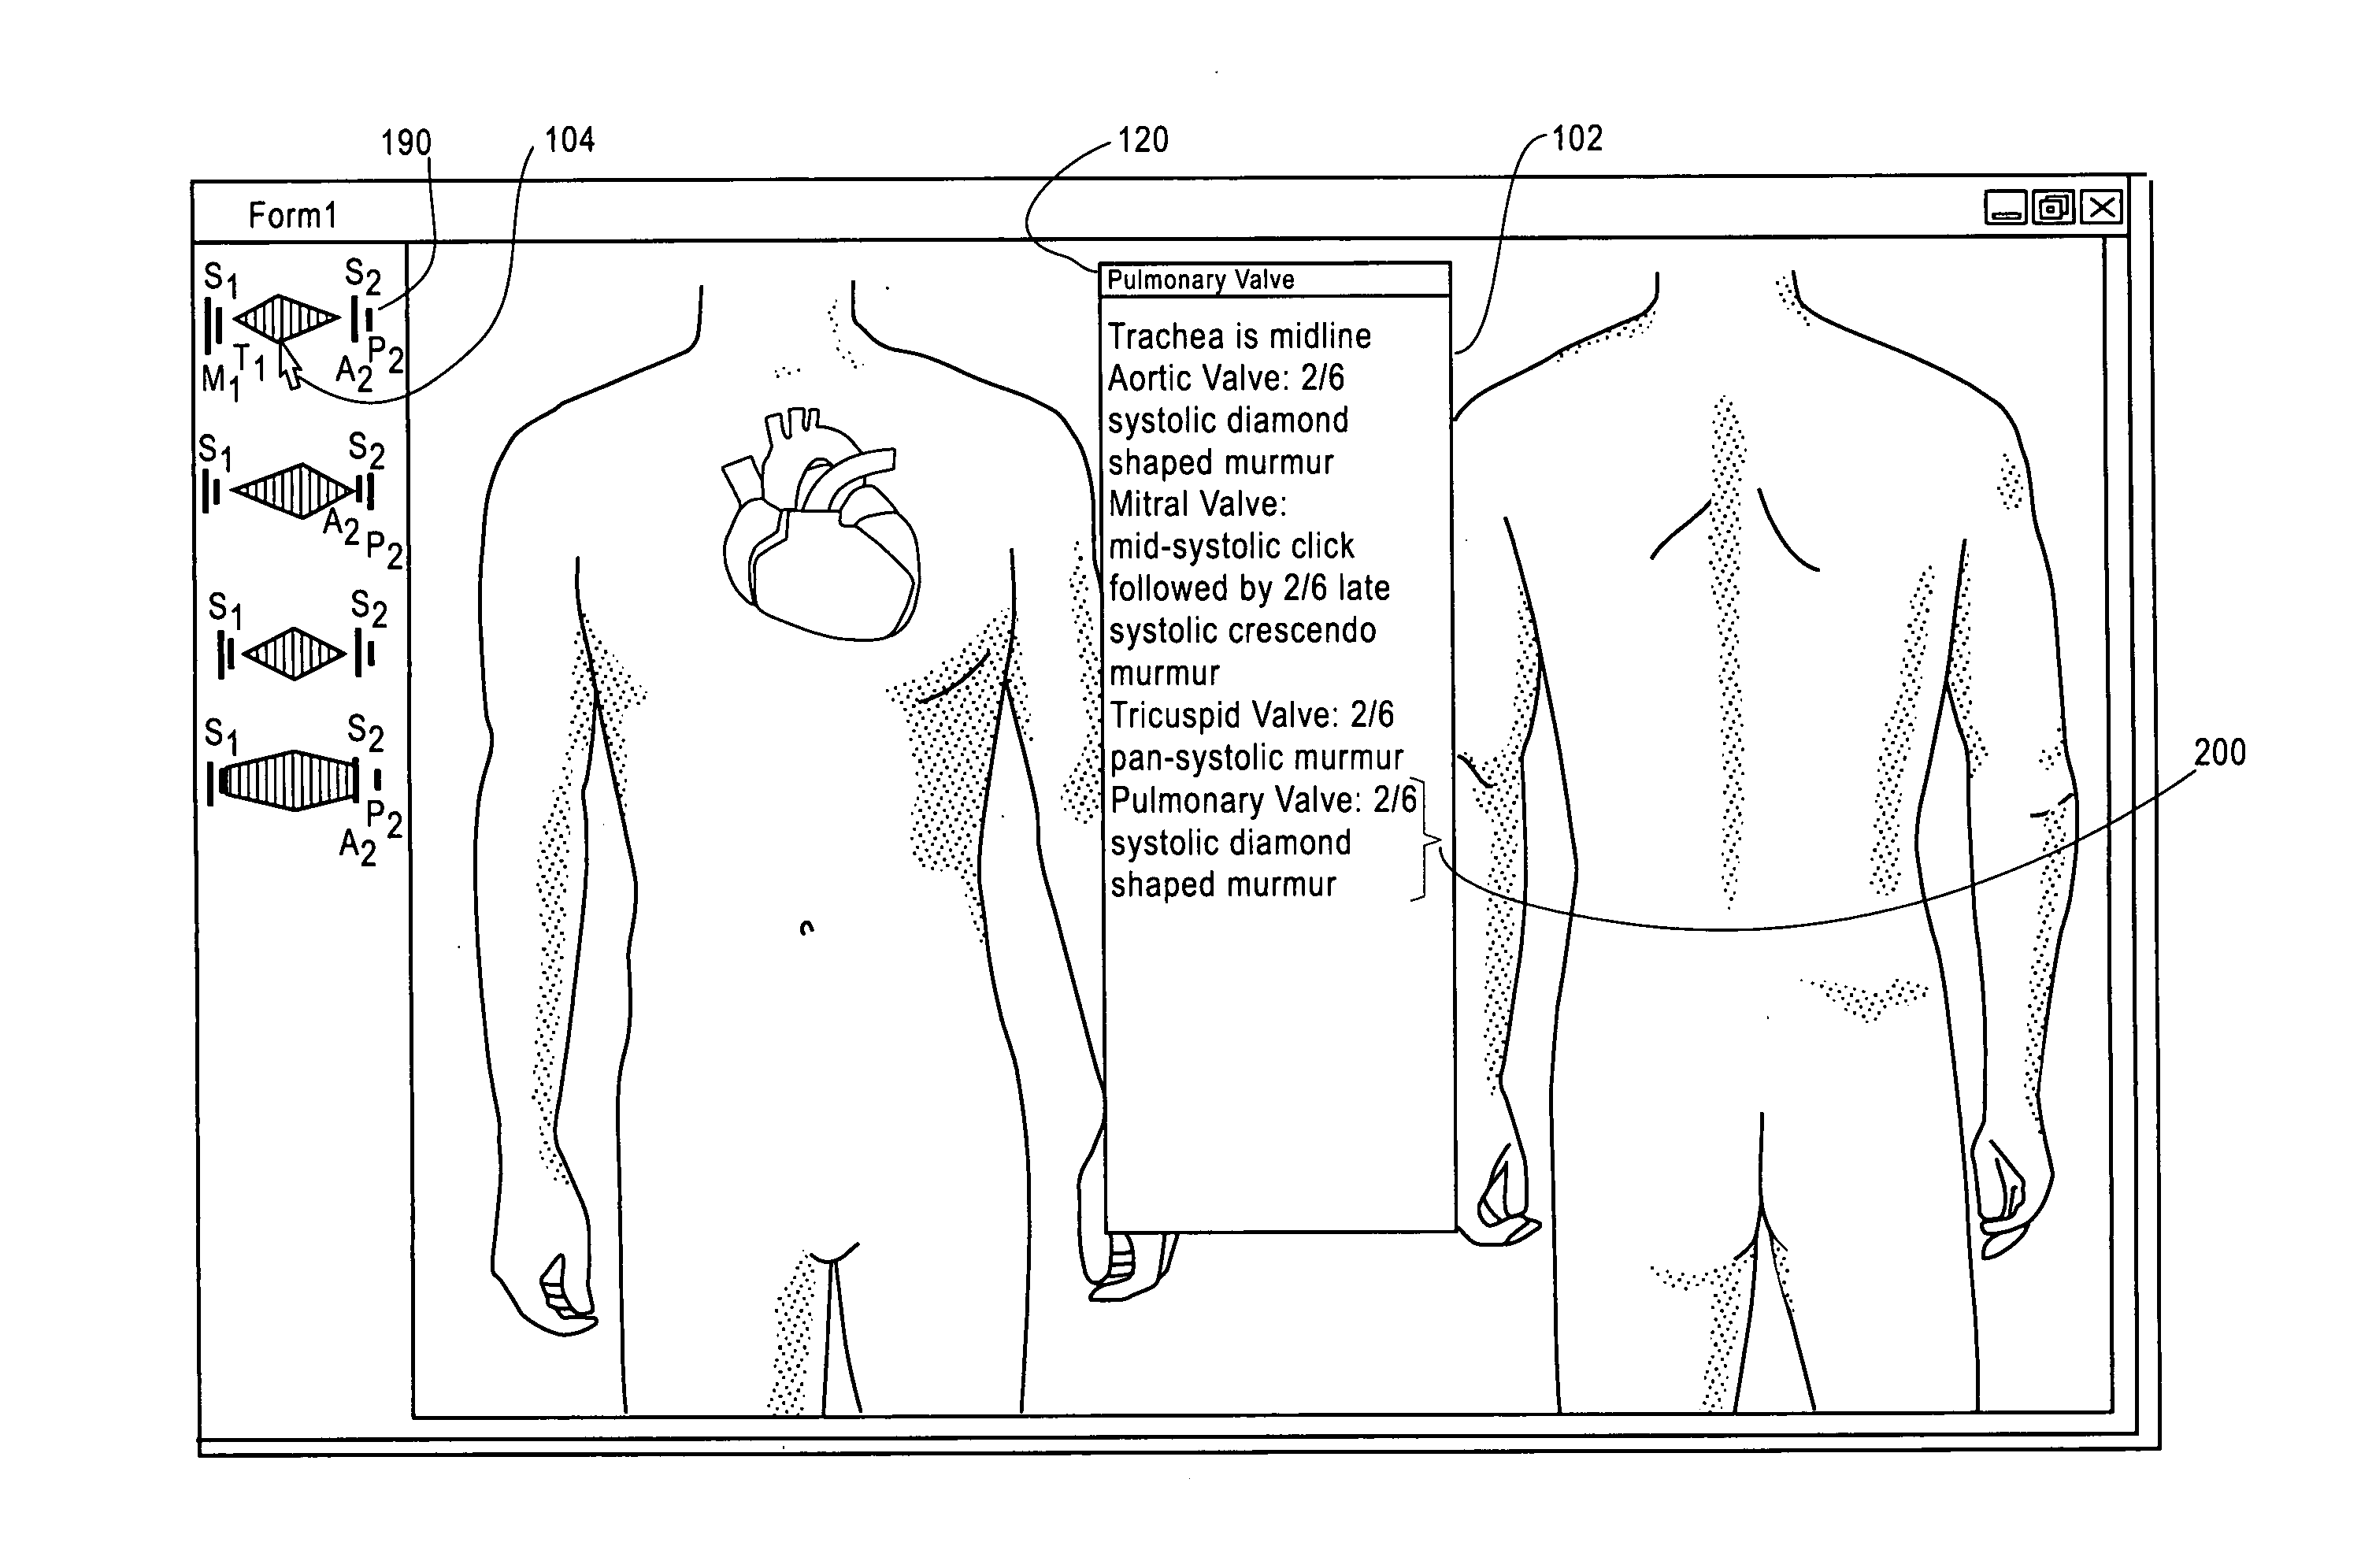 Visual charting method for creating electronic medical documents